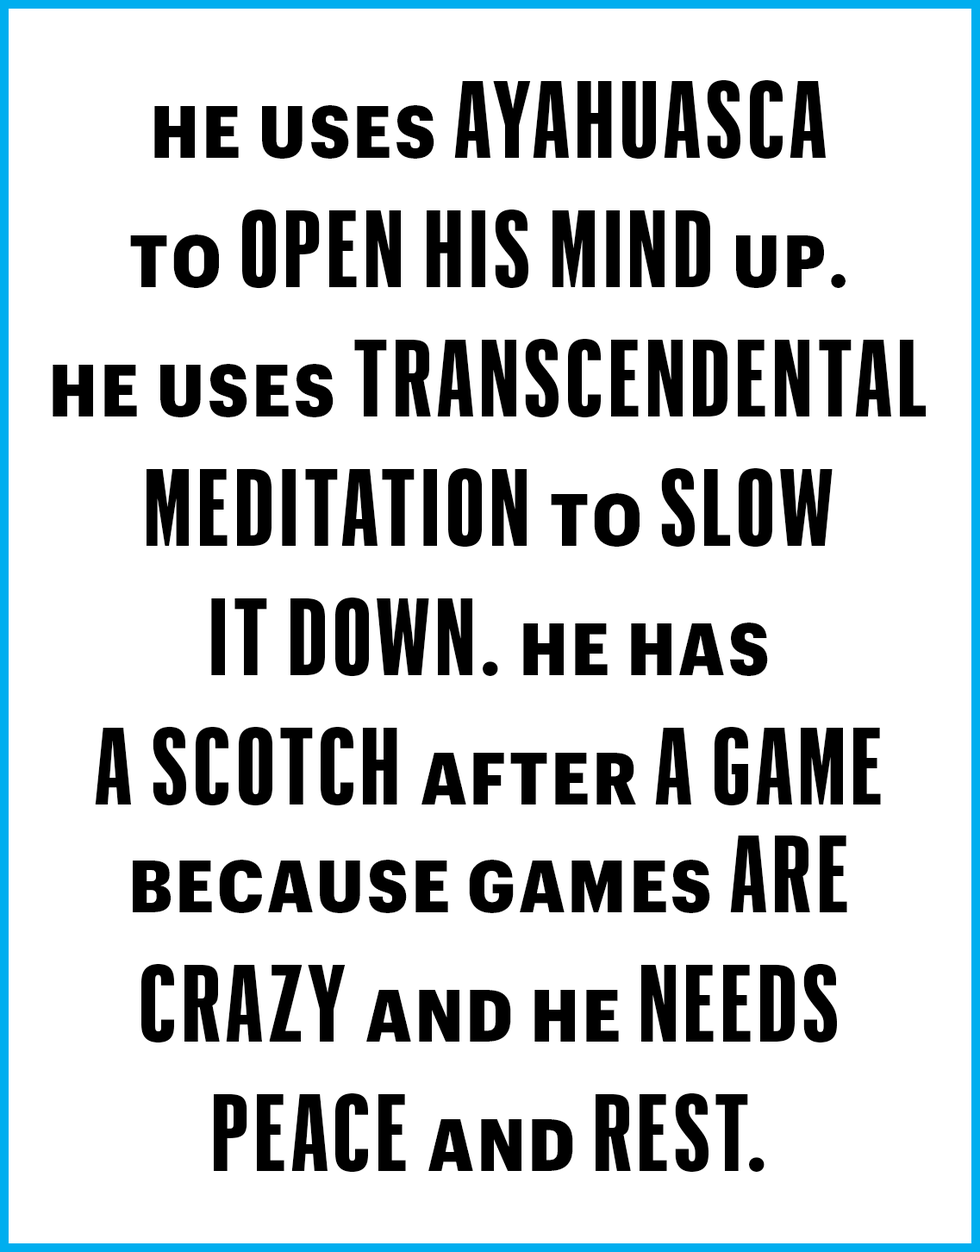 he uses ayahuasca to open his mind up he uses transcendental meditation to slow it down he has a scotch after a game because games are crazy and he needs peace and rest